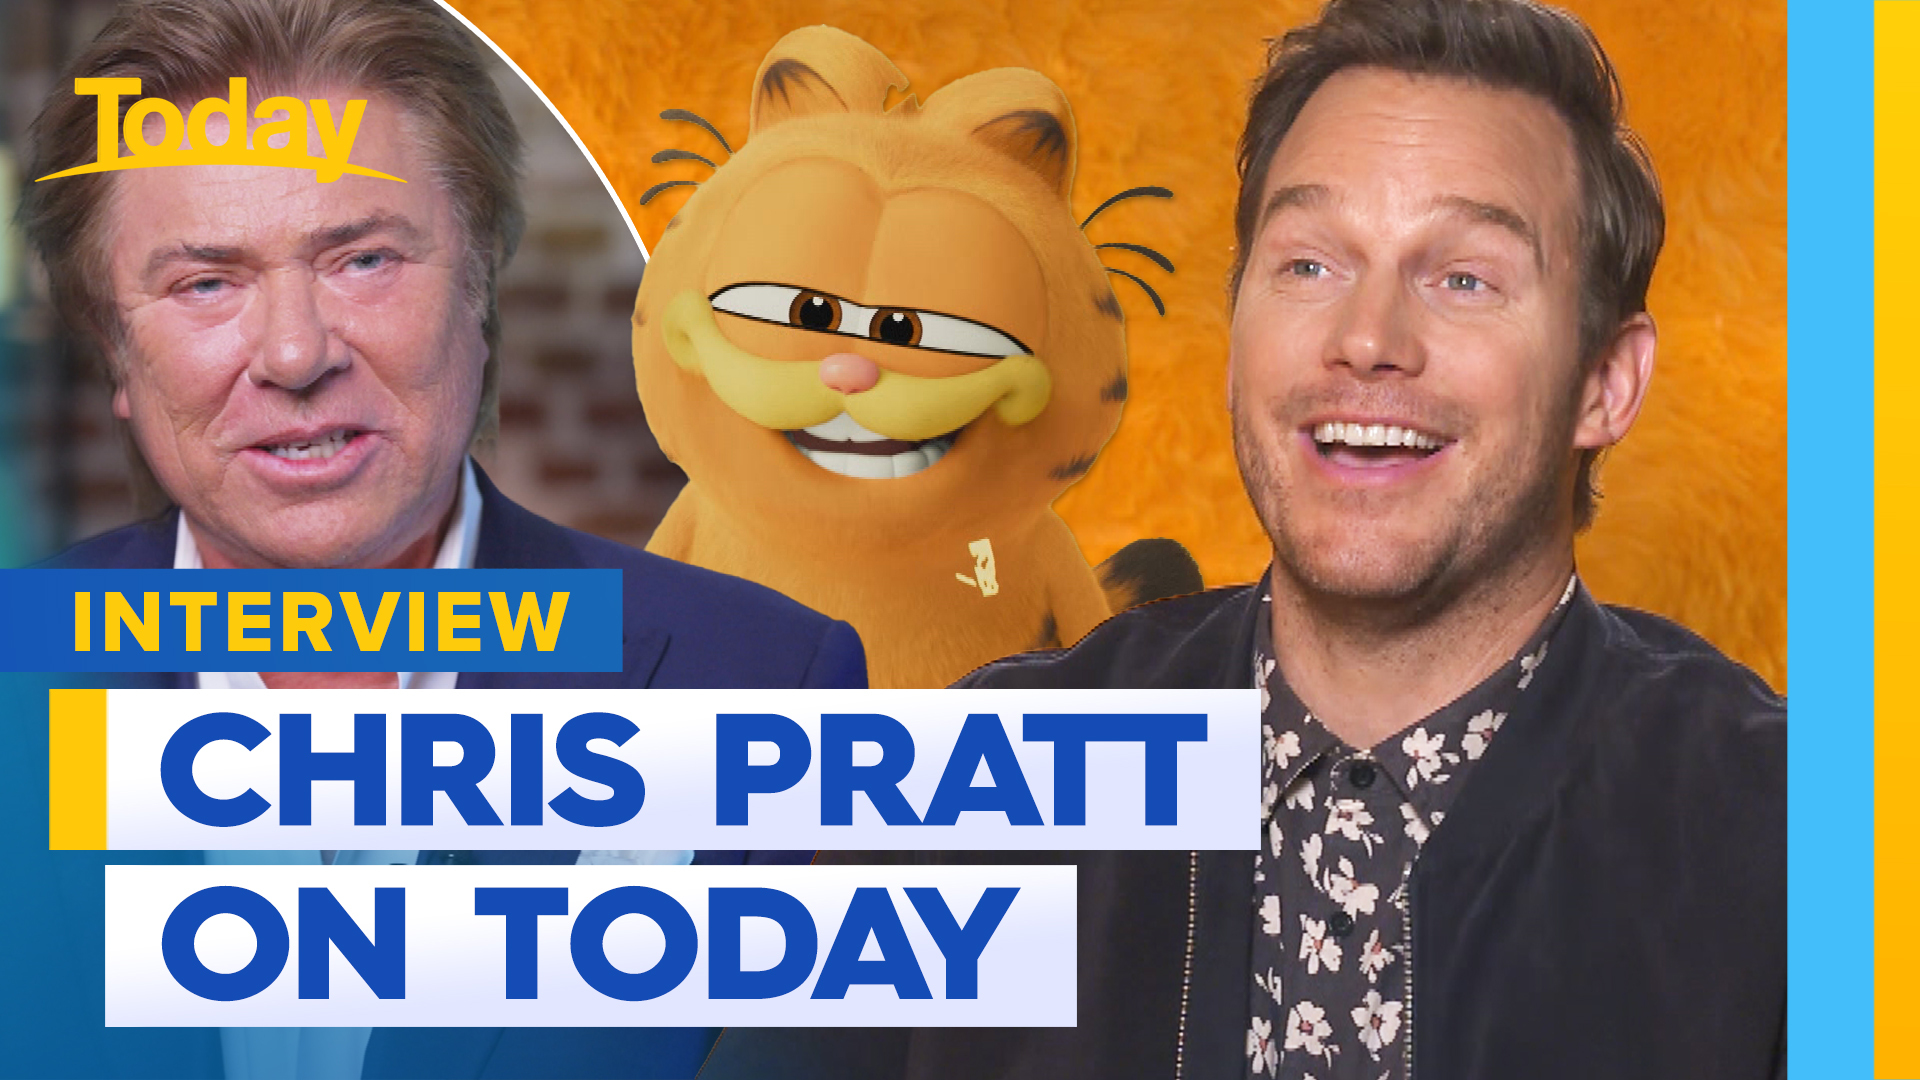 Chris Pratt catches up with Today